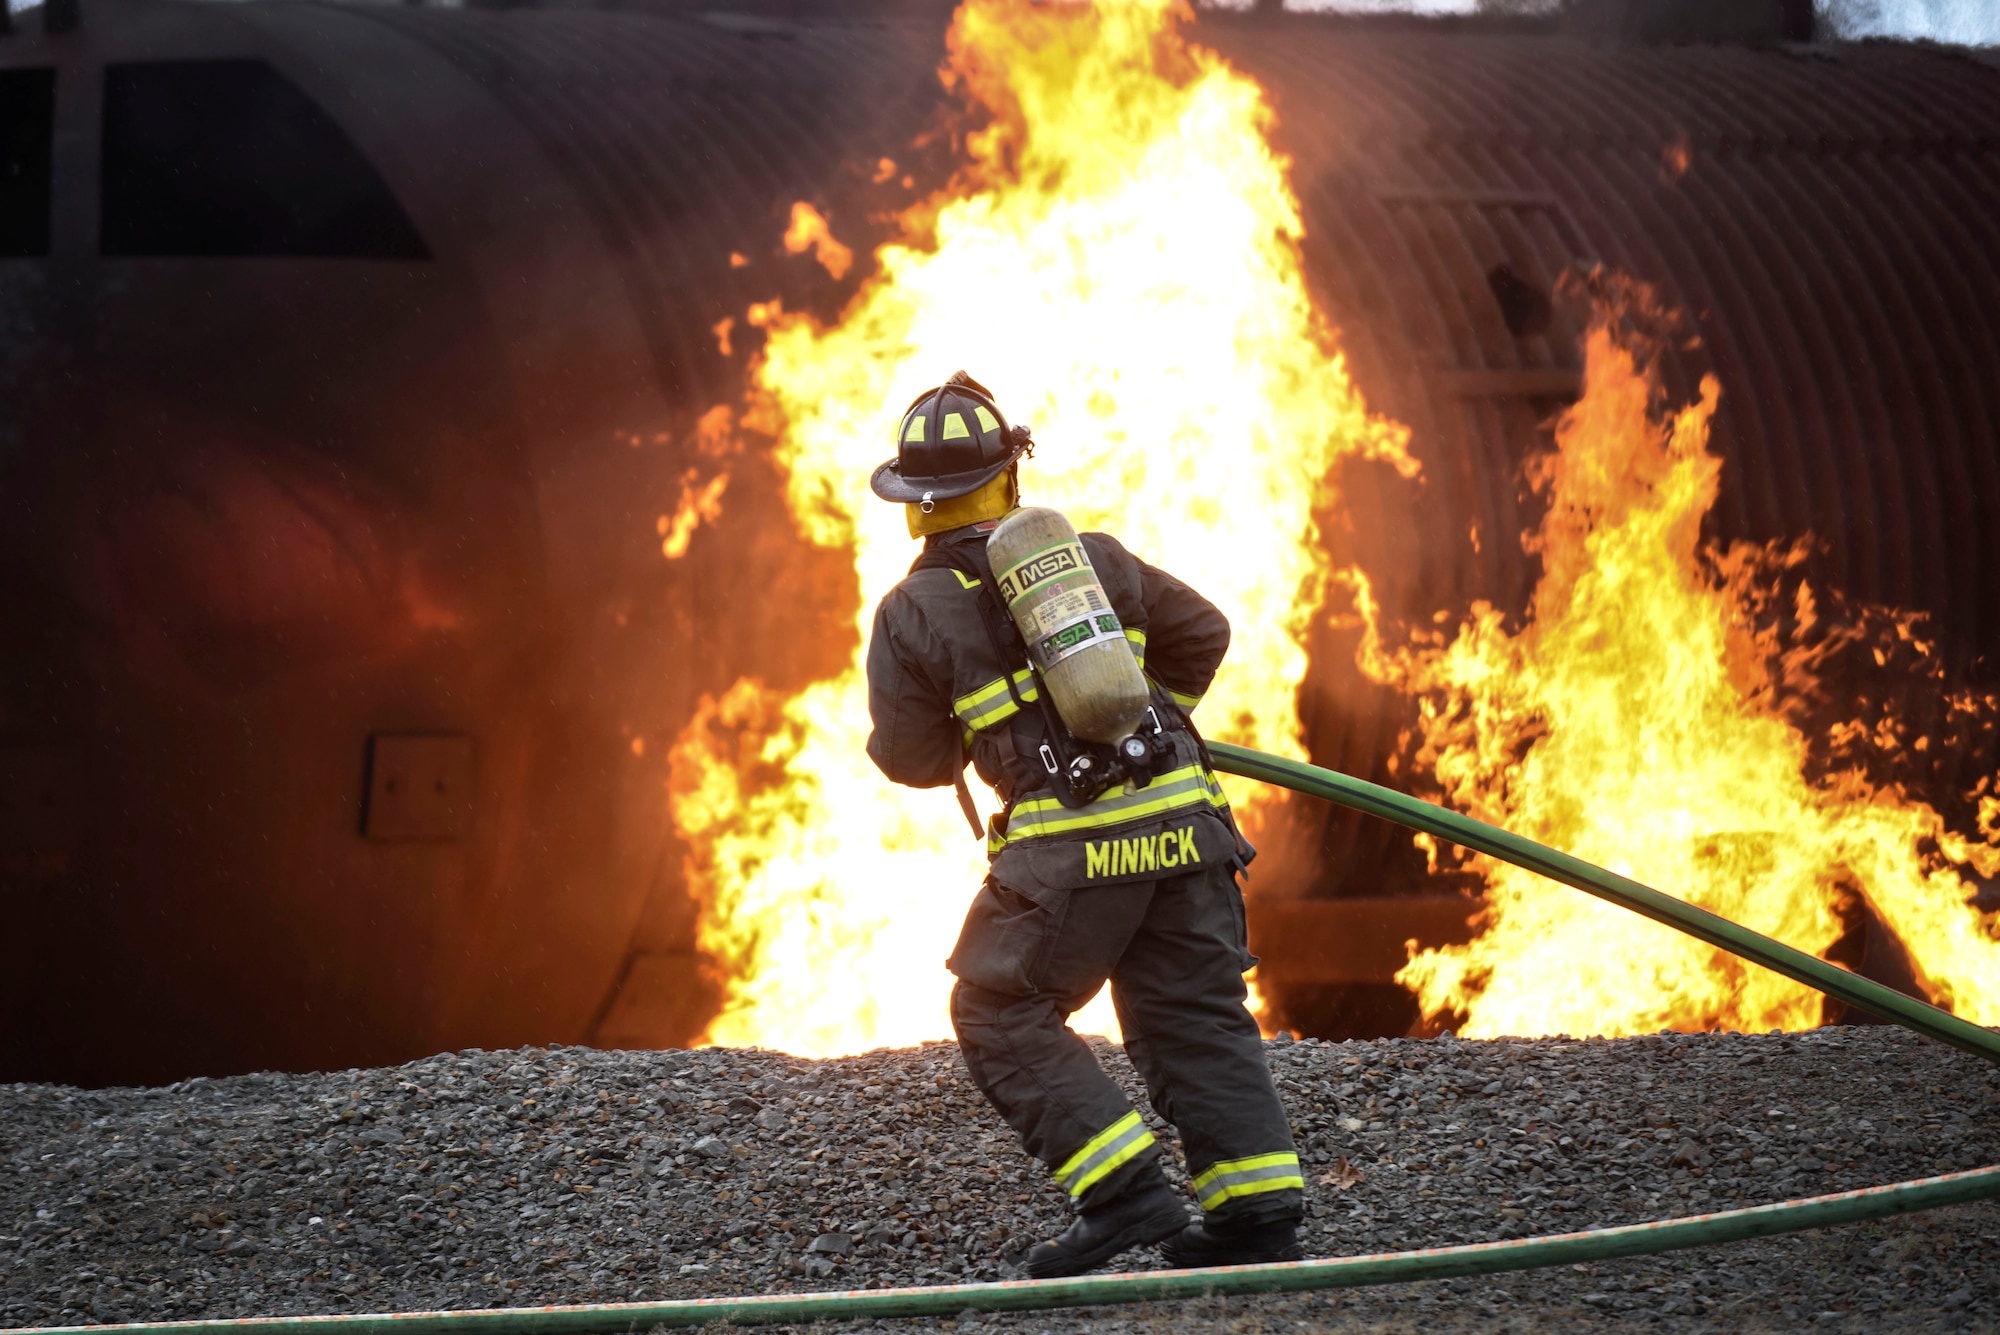 A male firefighter uses a firehose to extinguish a fire during a training burn on a simulated aircraft.